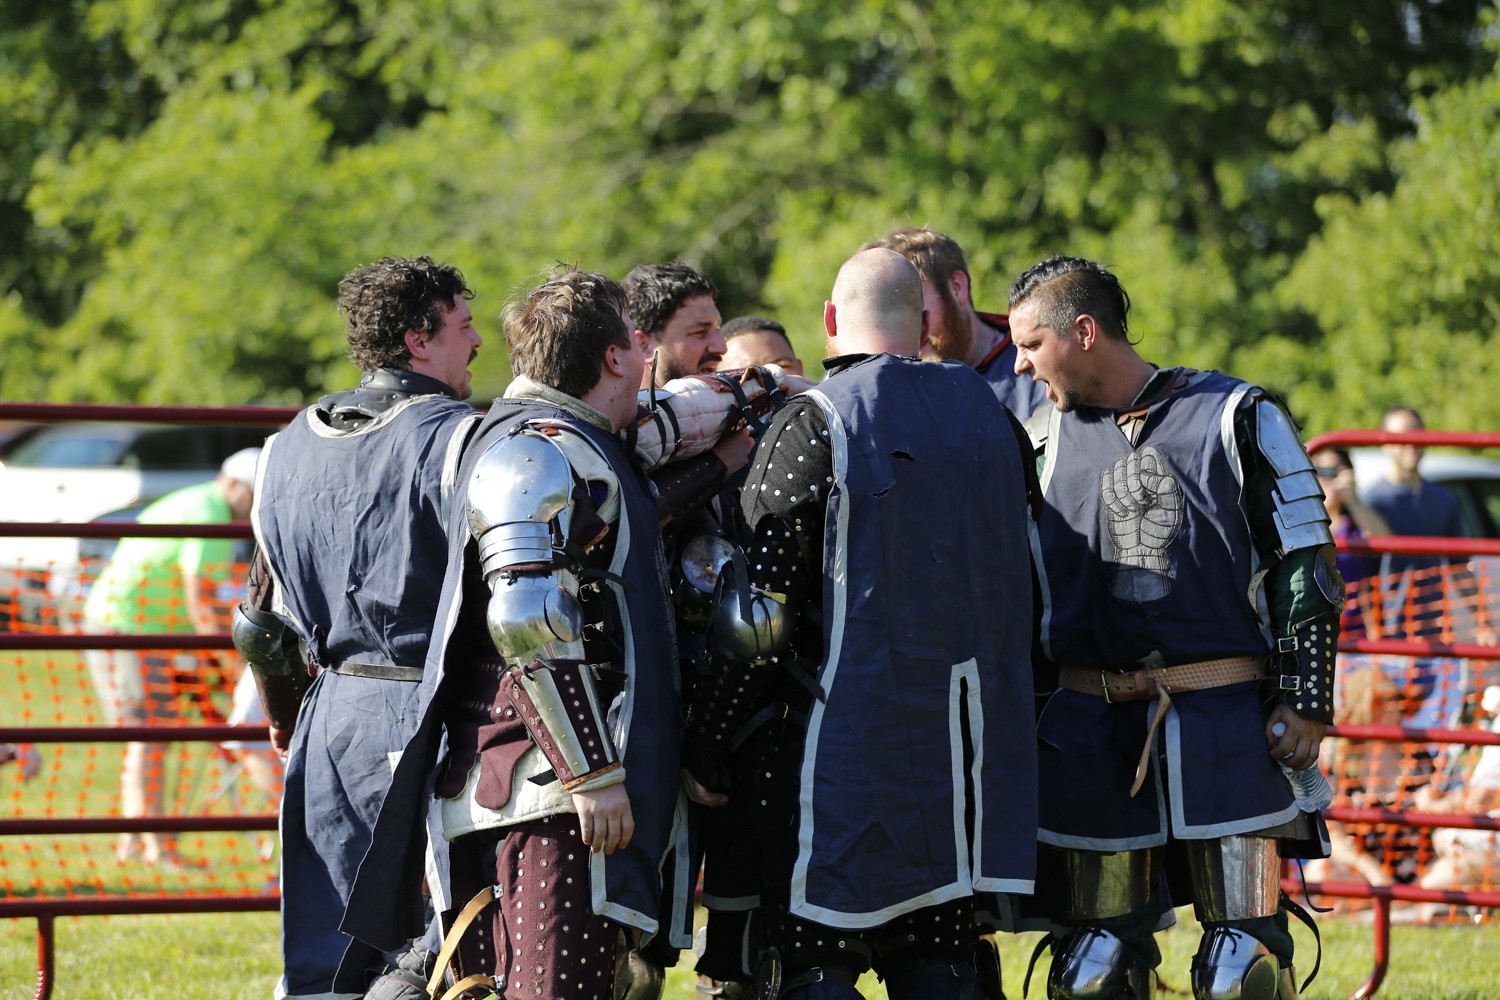 The knights gather together in celebration after the event.